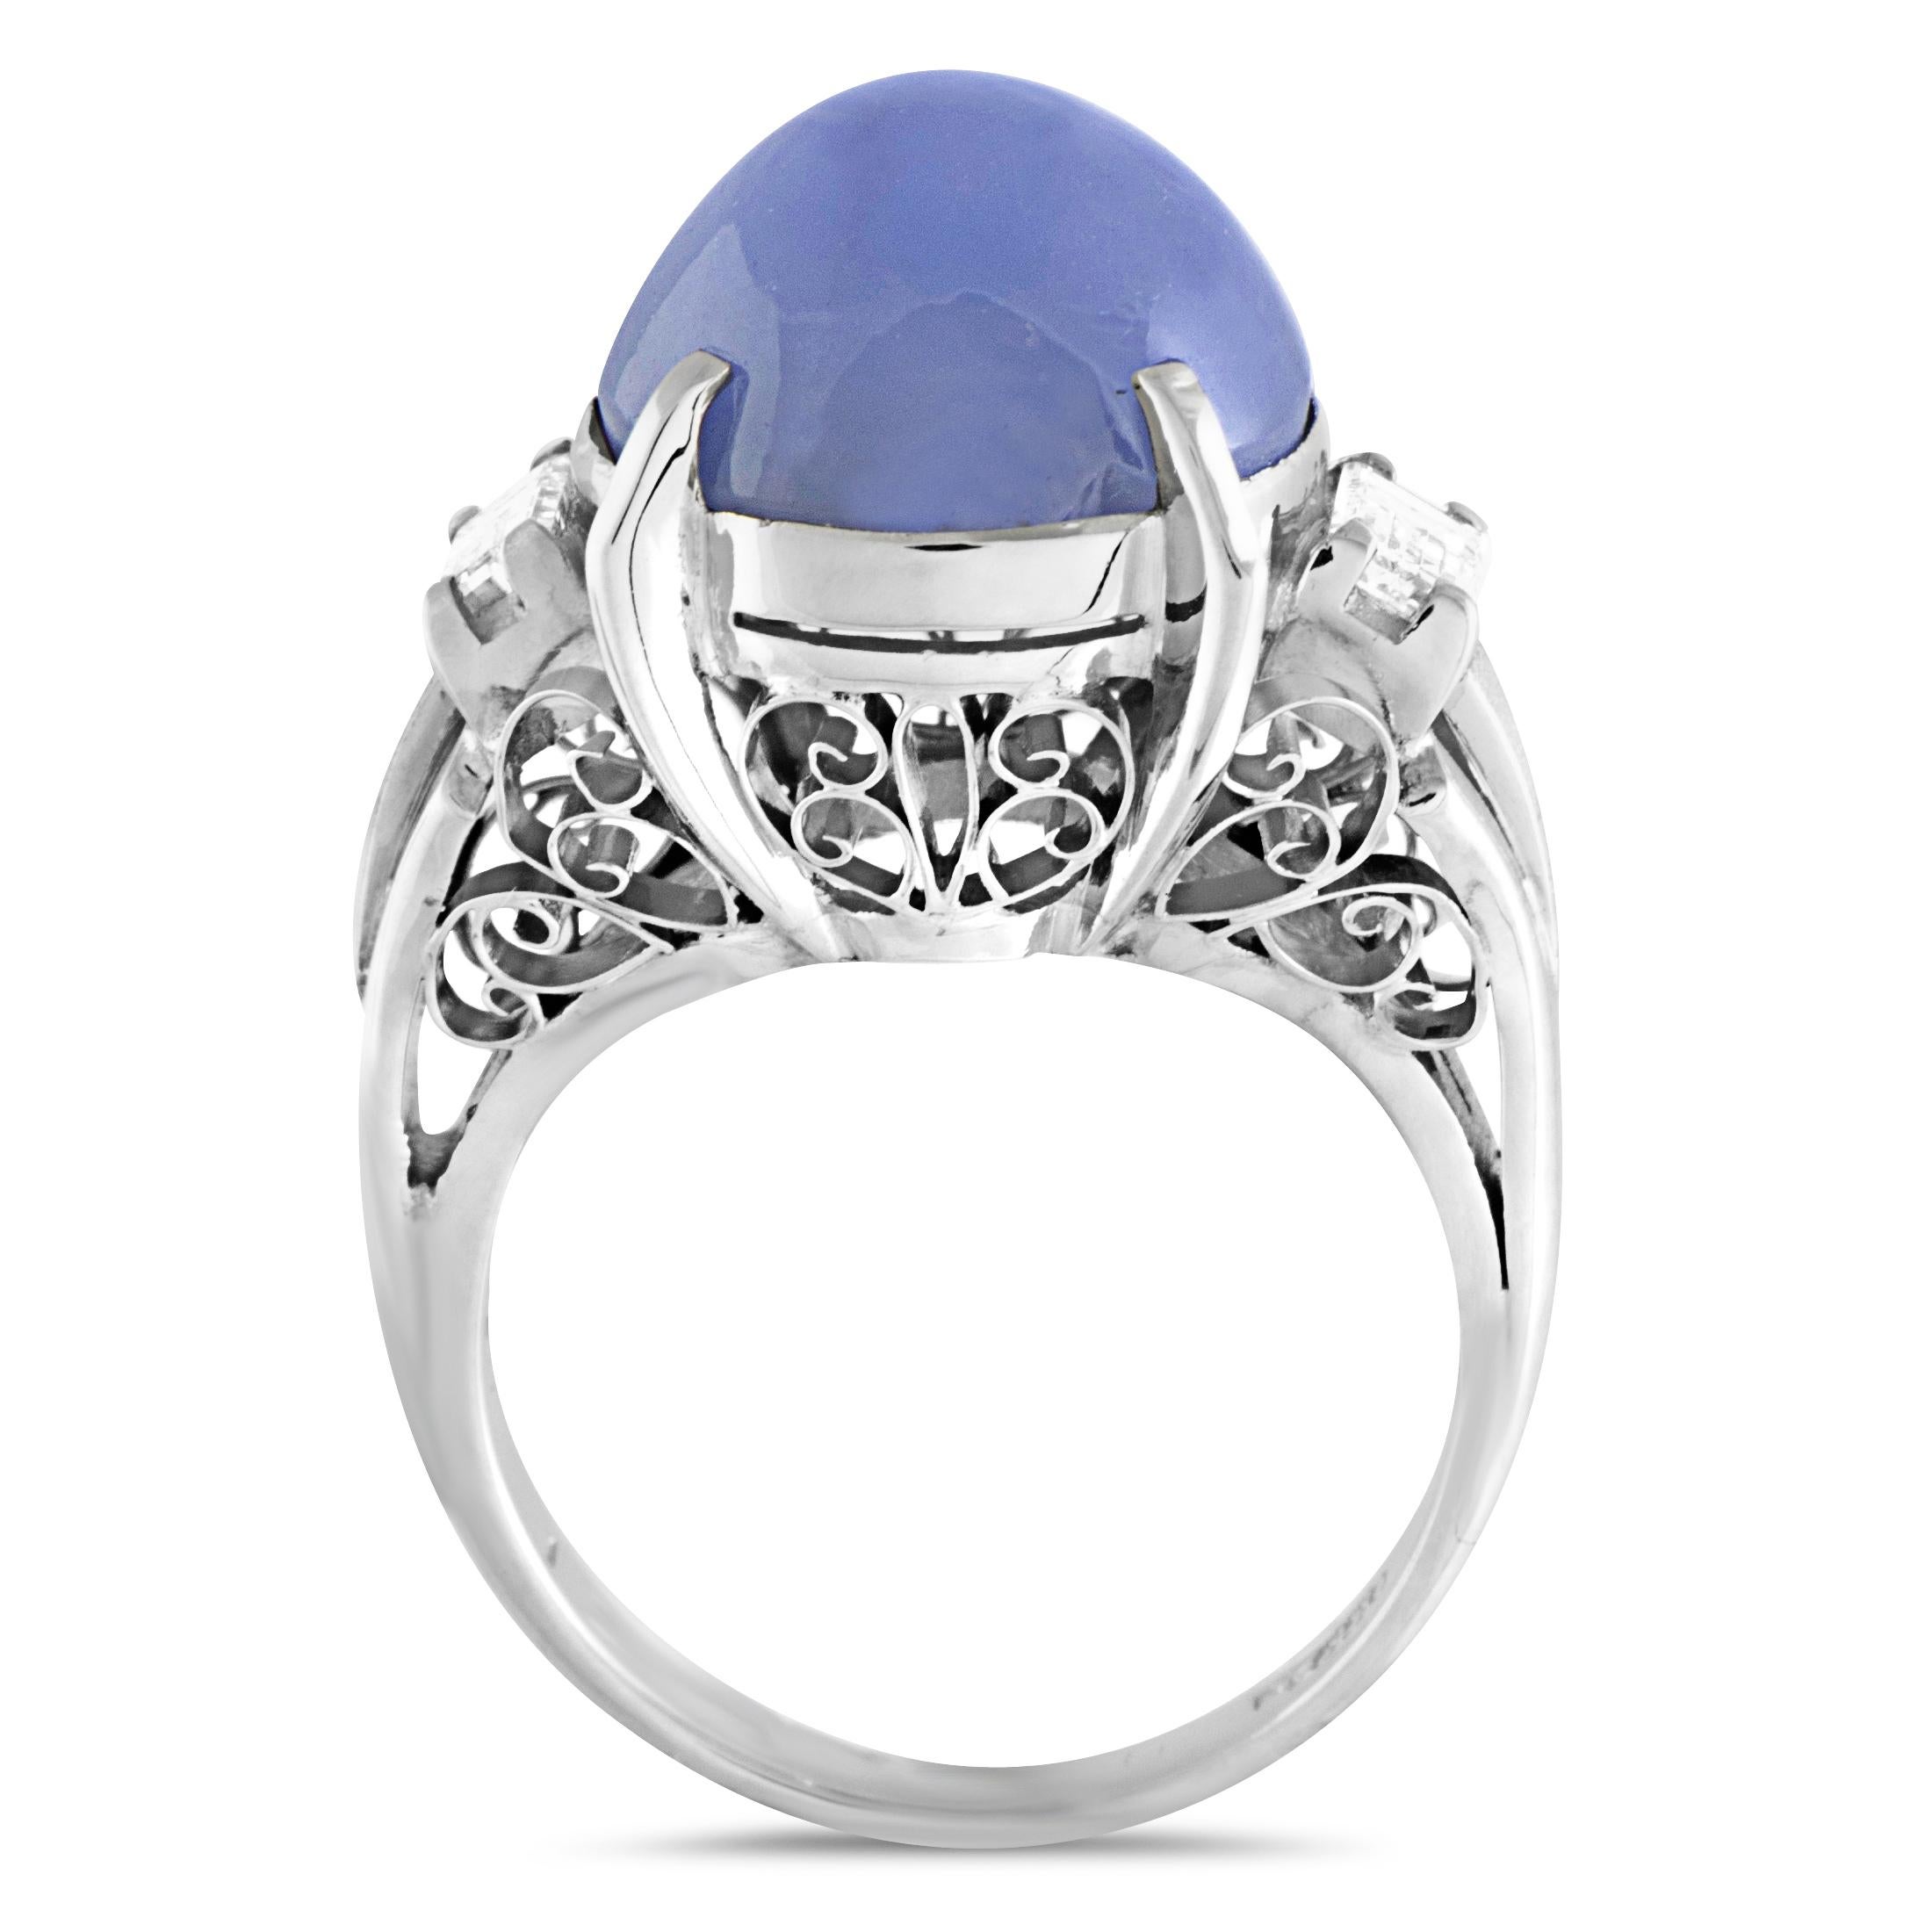 This beautiful platinum ring compels with its exceptionally elegant design and incredibly opulent décor. The extravagant ring is set with 0.40ct of sparkling diamonds around a magnificent 12.25ct star sapphire.
Ring Top Dimensions: 17mm x 13mm